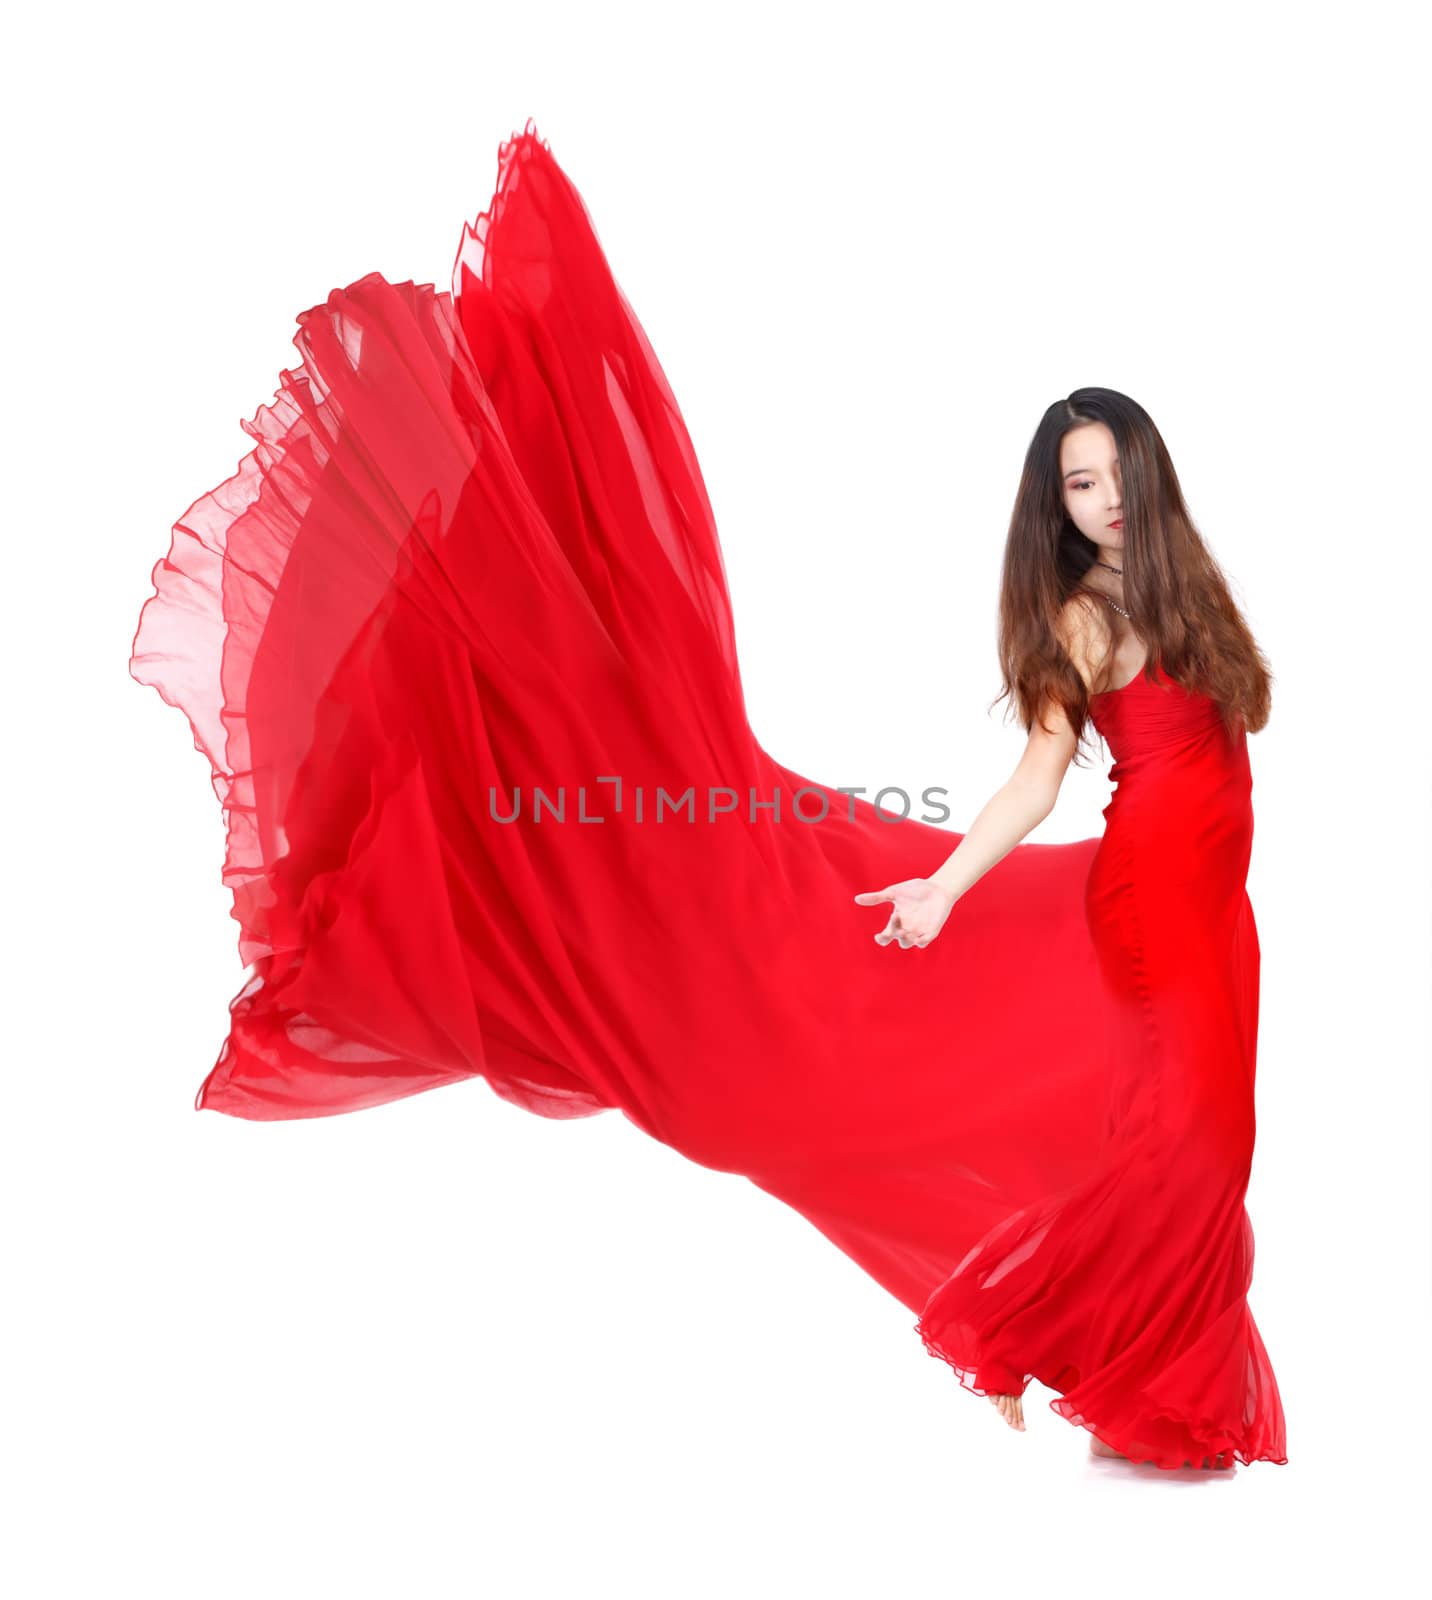 Young Woman in Flowing Red Dress on White Background by melpomene